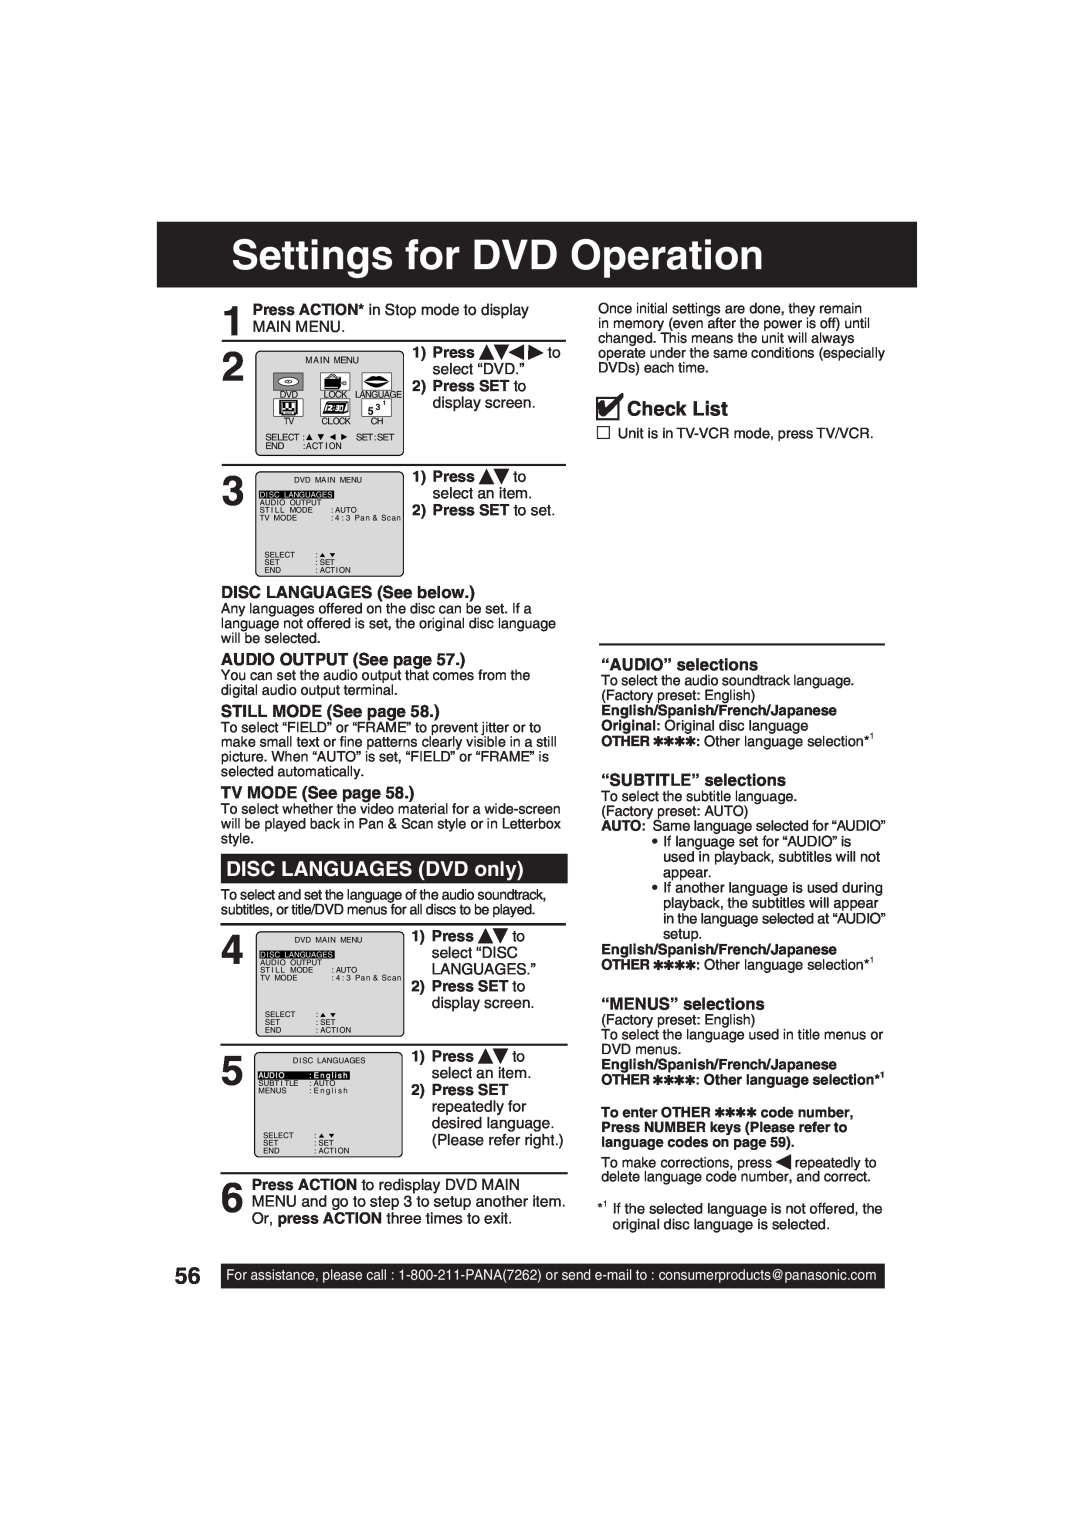 Panasonic PV-DF203 Settings for DVD Operation, DISC LANGUAGES DVD only, DISC LANGUAGES See below, AUDIO OUTPUT See page 